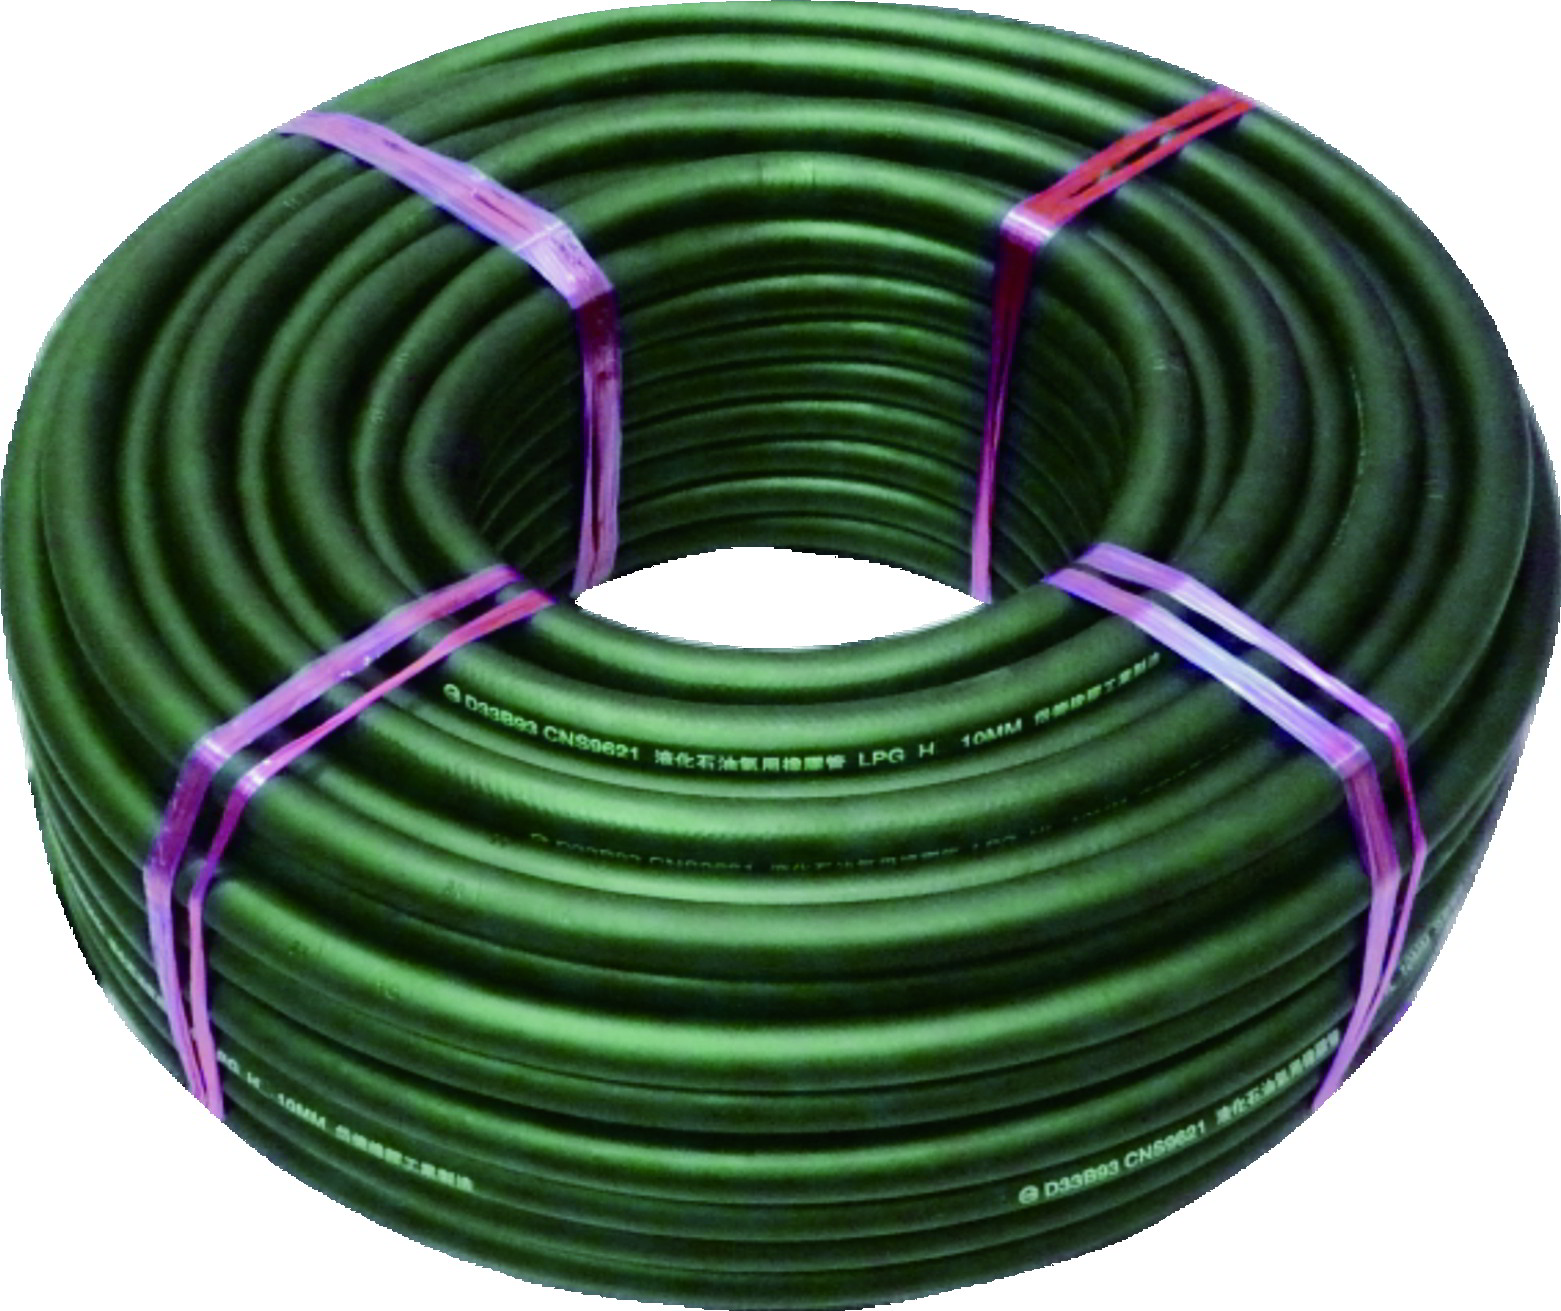 CNS9621 business with a rubber tube (H level) Series (includes dimensions)